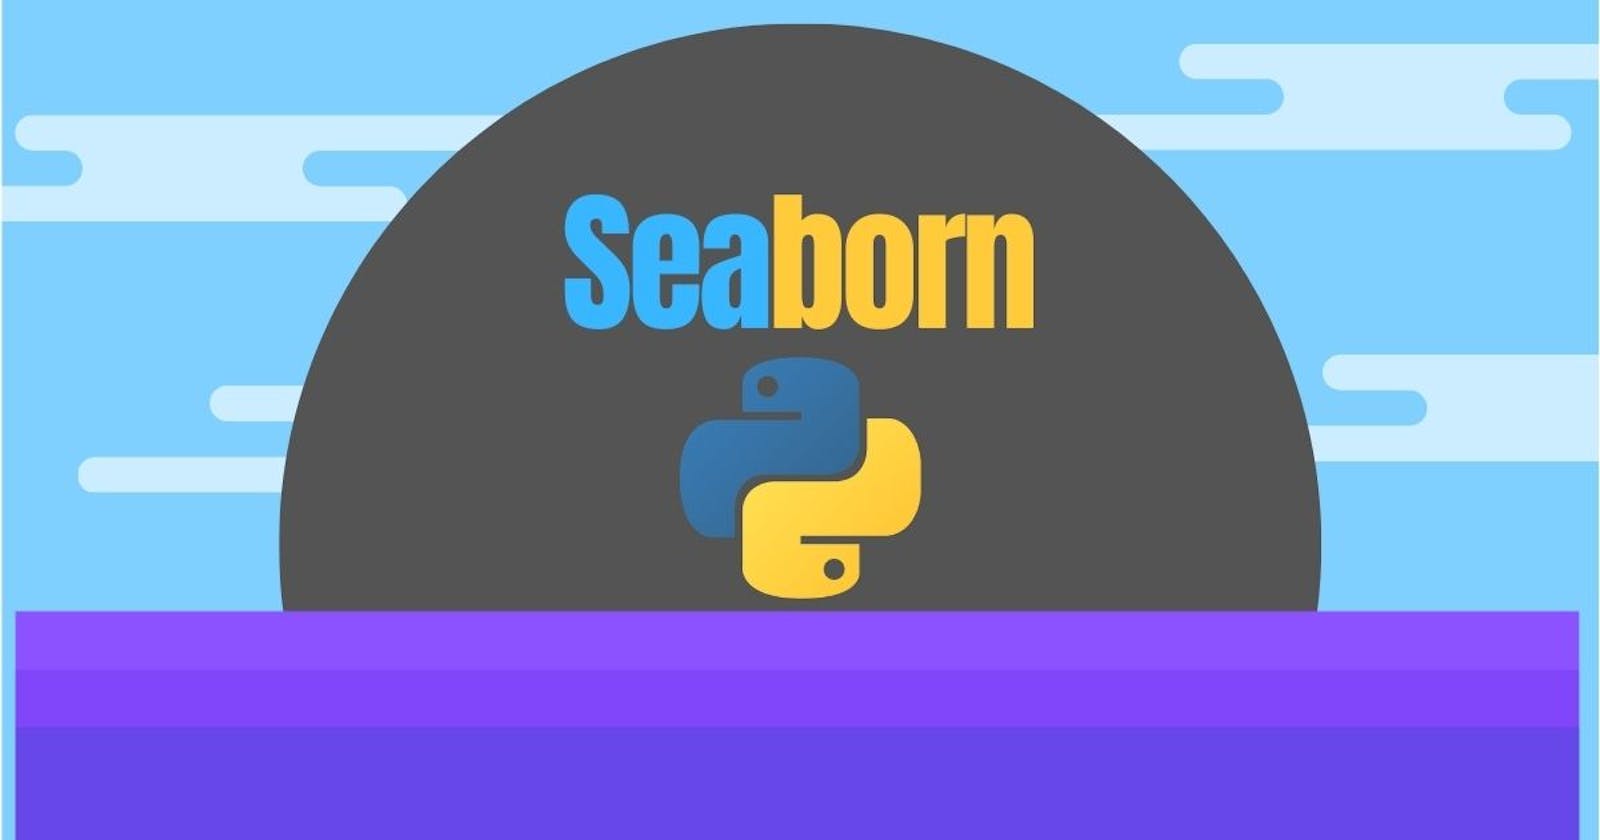 All about Seaborn under 5 minutes